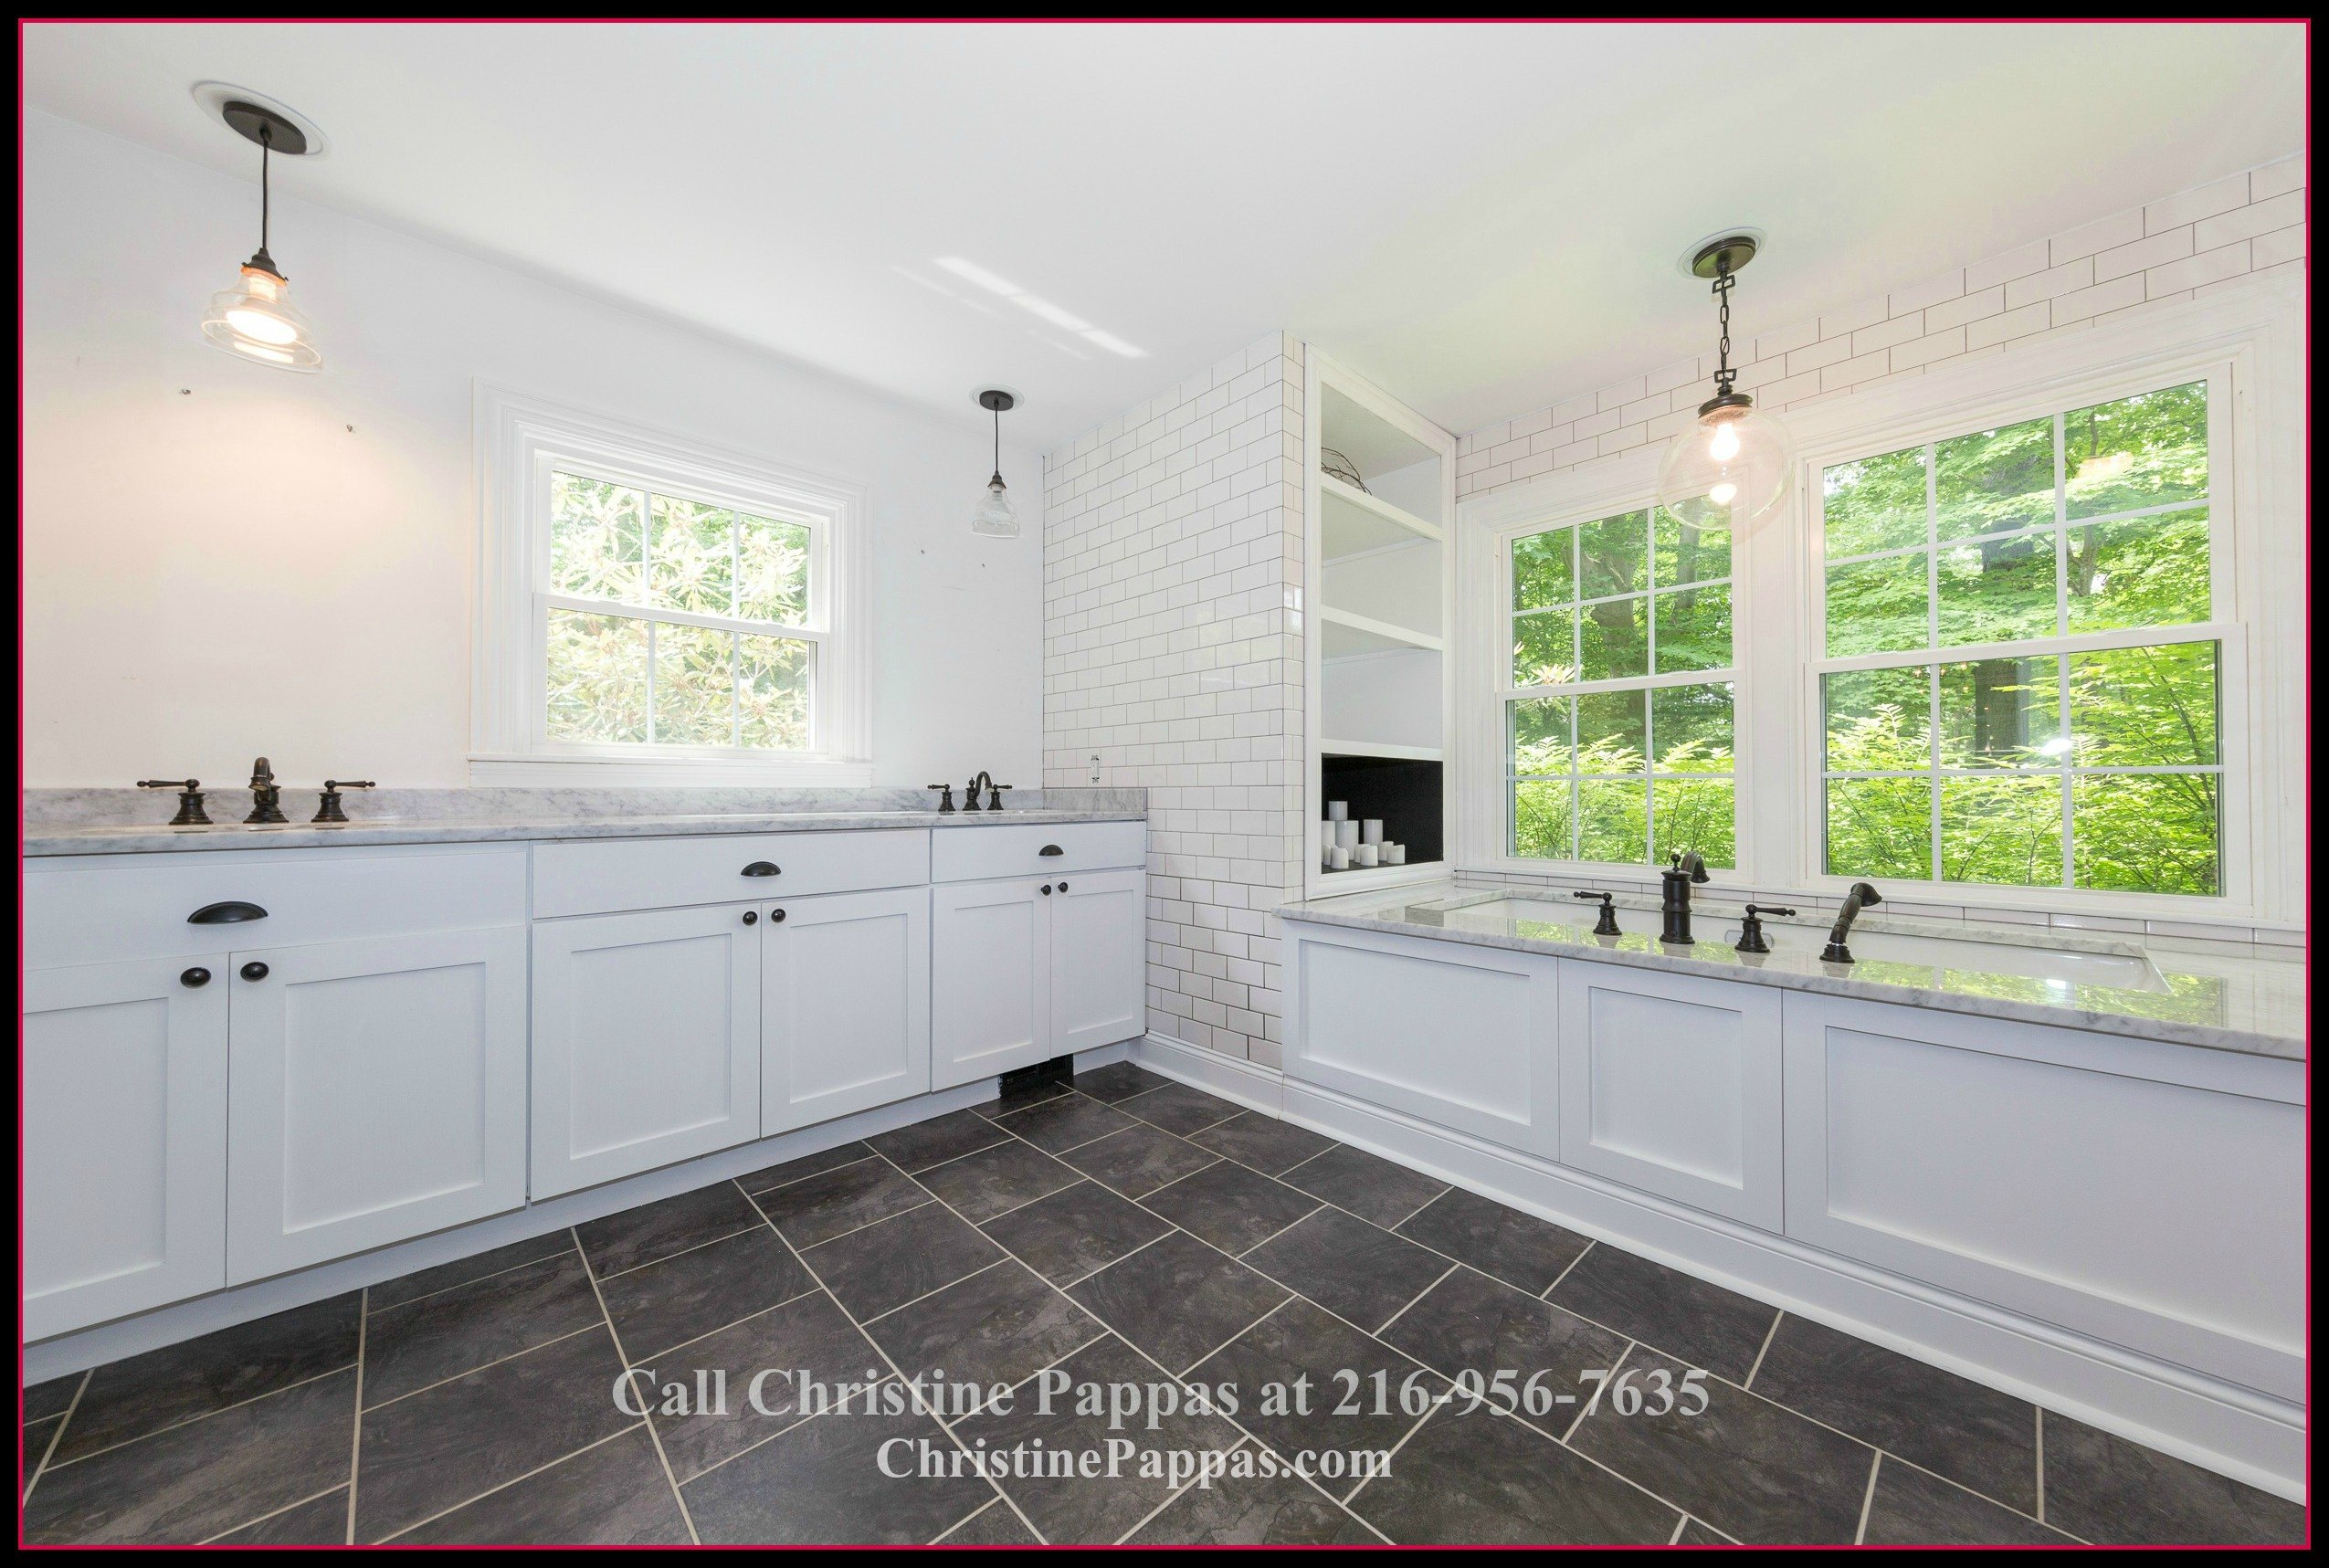 Sophistication is what the master bathroom of this home for sale in Gates Mills OH, exudes - with the spa-like features it brings, you will enjoy your private time.